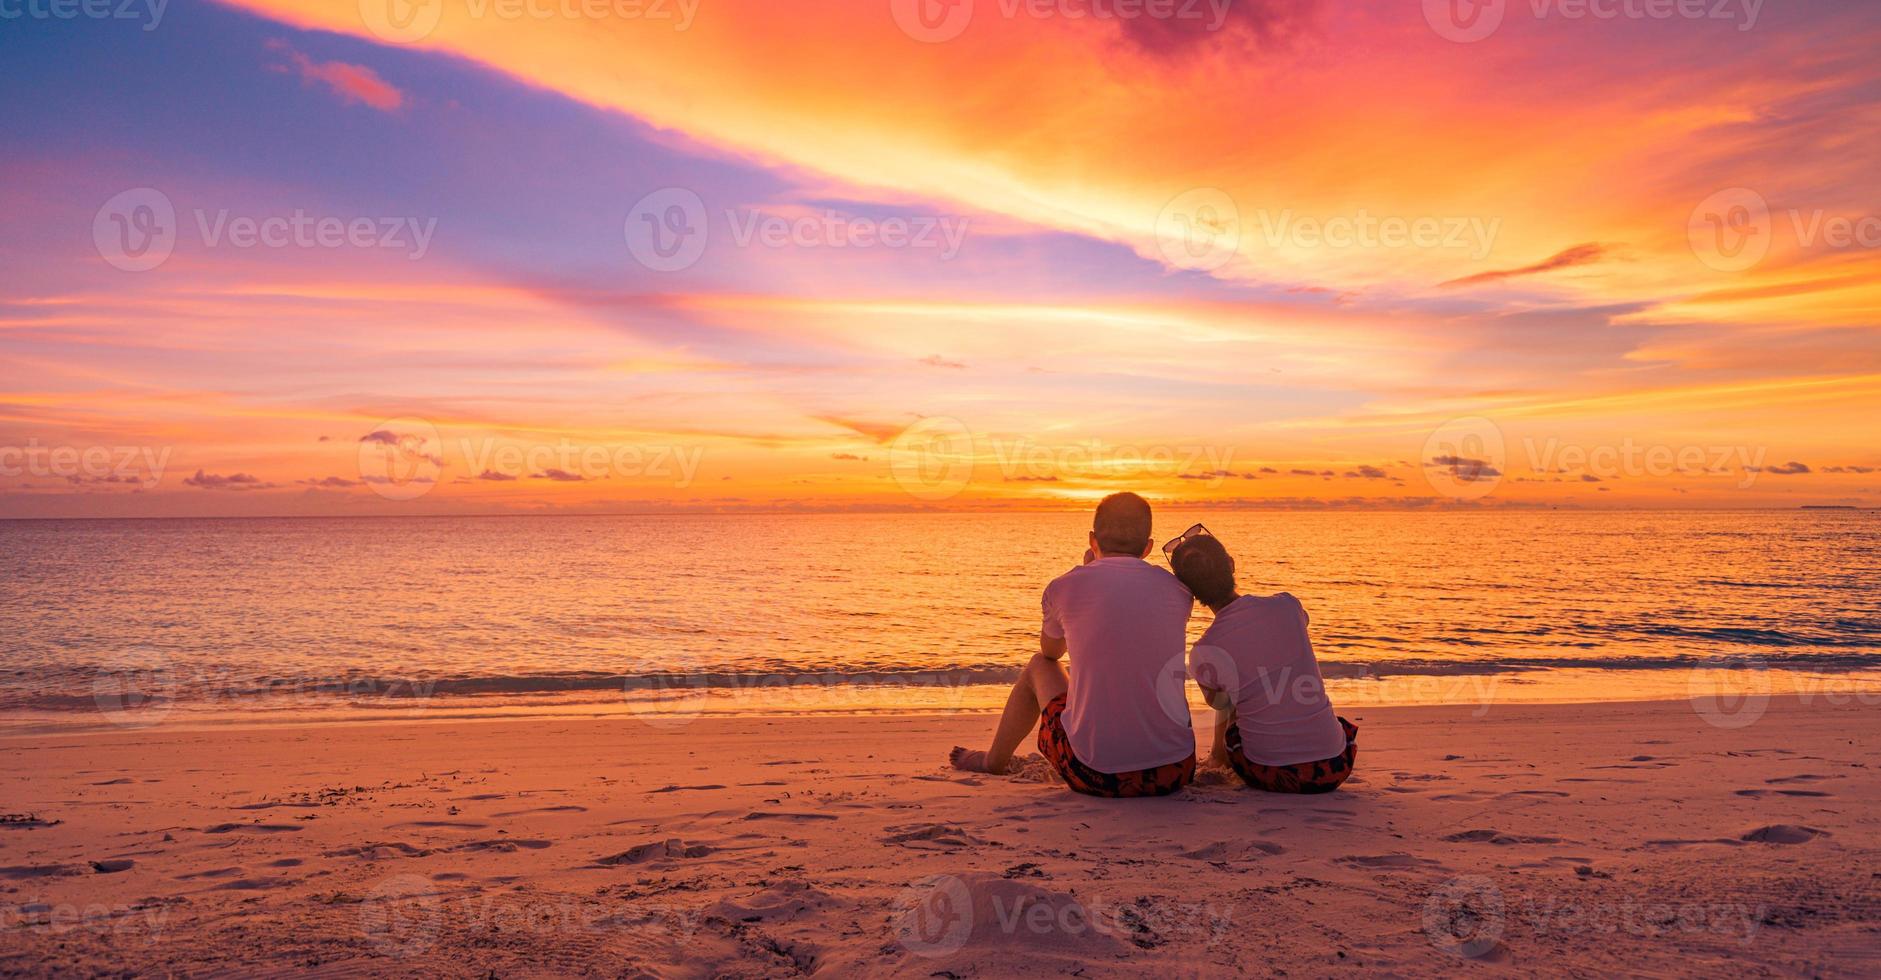 Love couple watching sunset together on beach travel summer holidays. People silhouette from behind sitting enjoying view sunset sea tropical island, destination vacation. Romantic freedom lifestyle photo